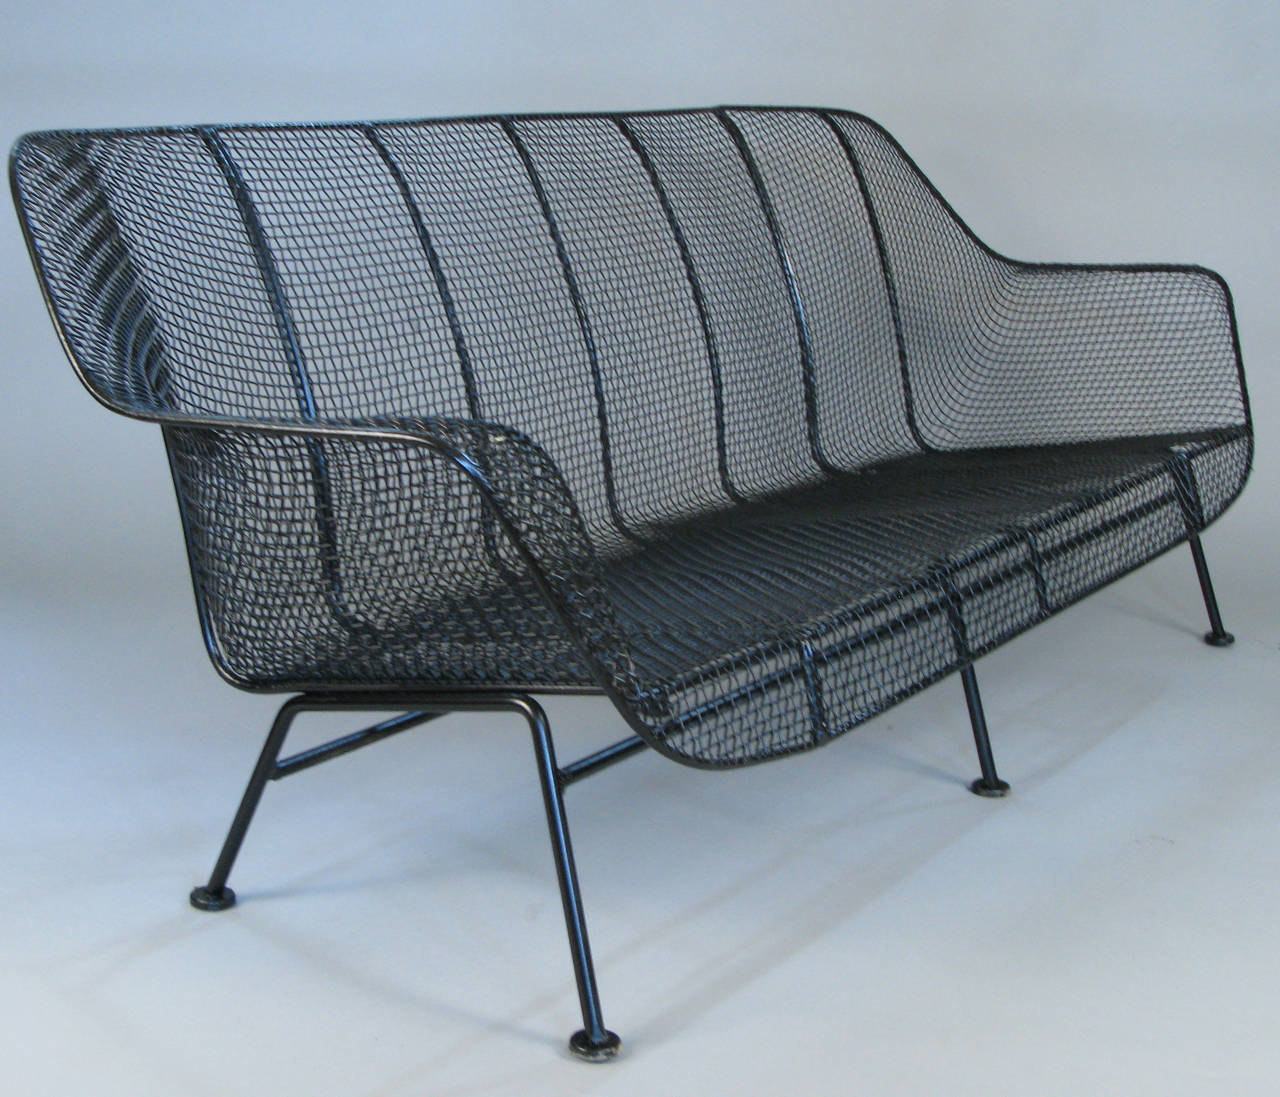 Wrought Iron Rare 1950s Sculpture Sofa by Russell Woodard